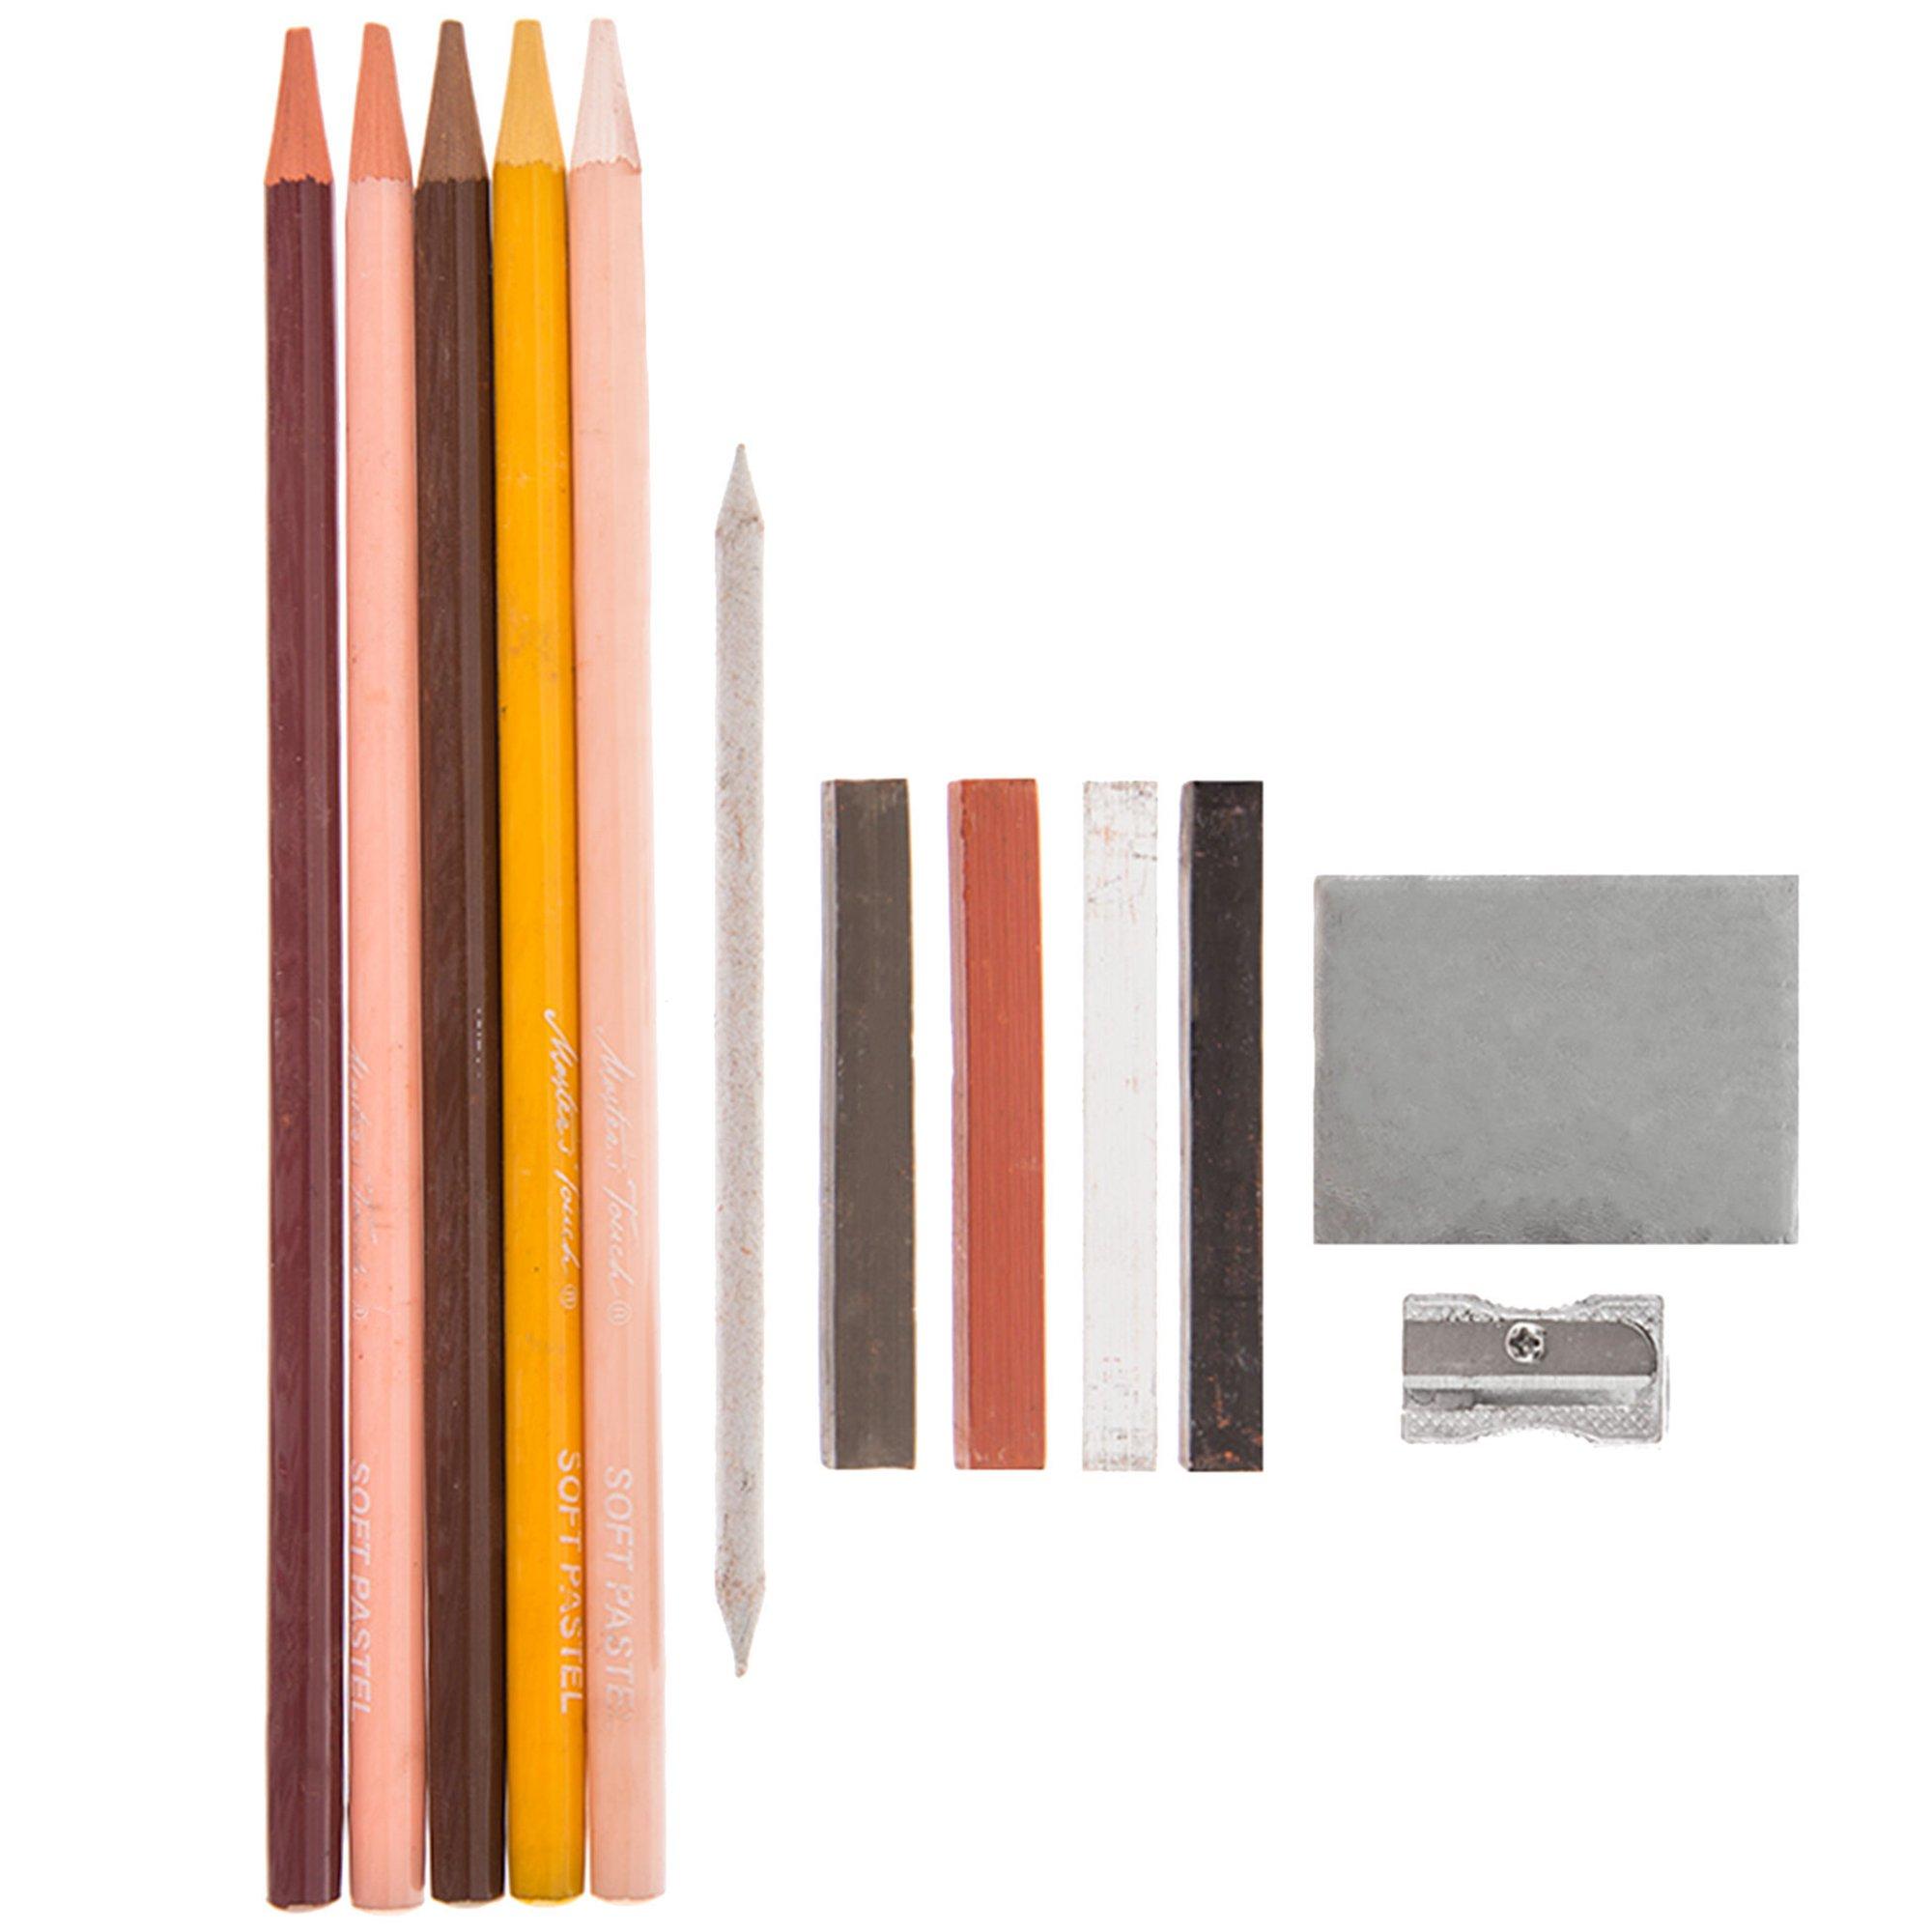 The Fine Touch Sketching Pencils - 12 Piece Set, Hobby Lobby